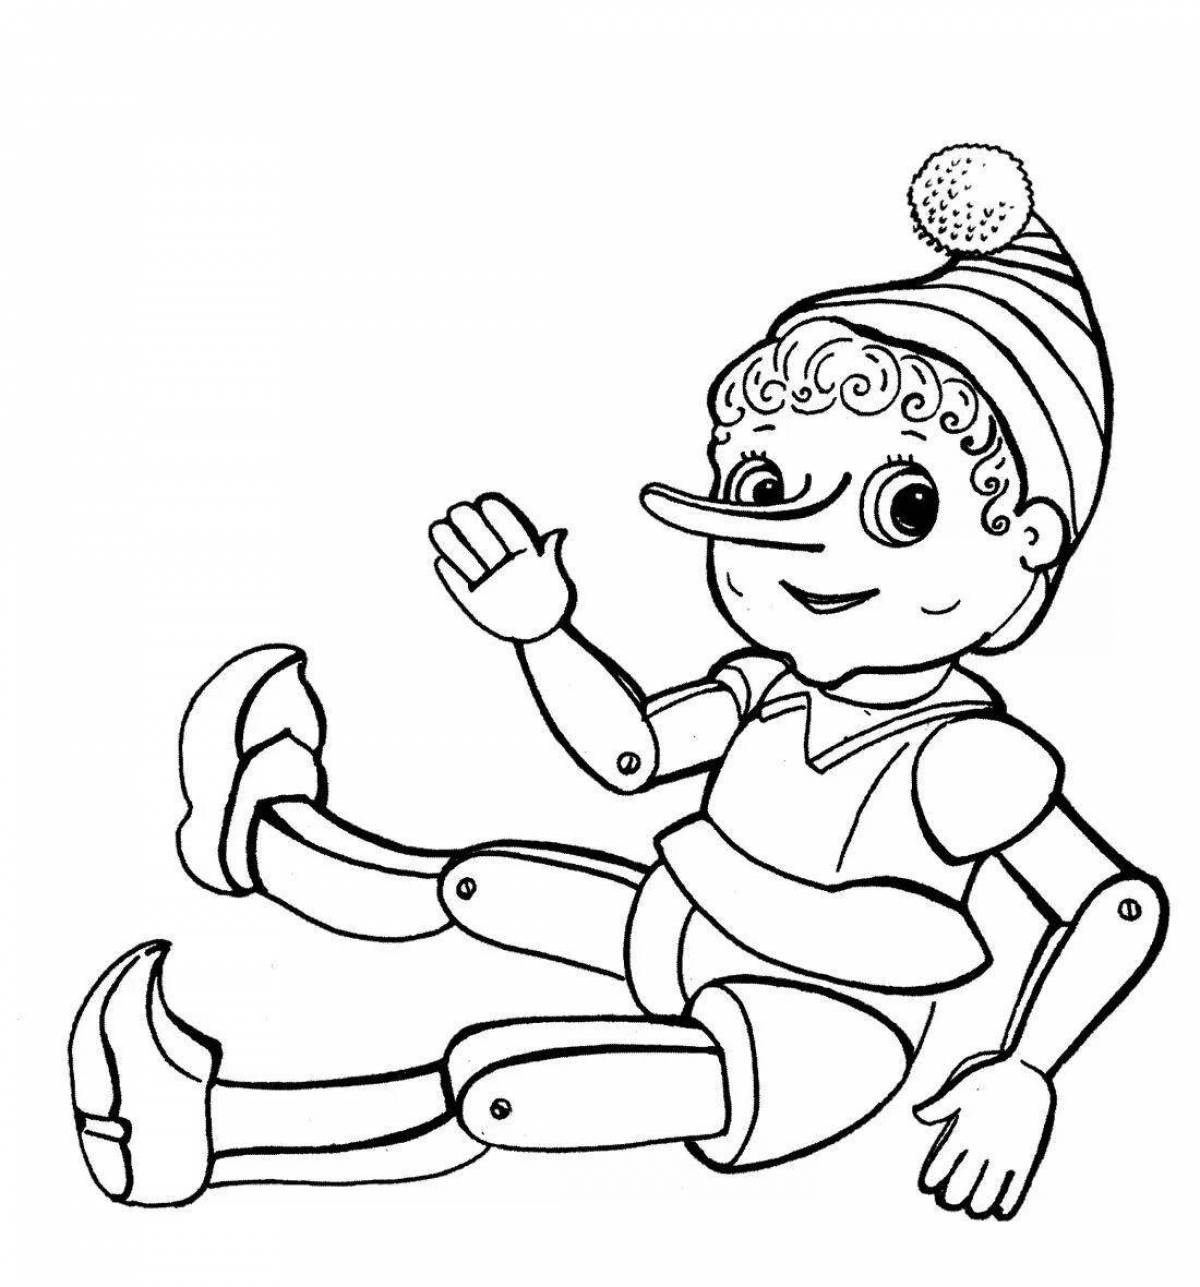 Exciting pinocchio coloring